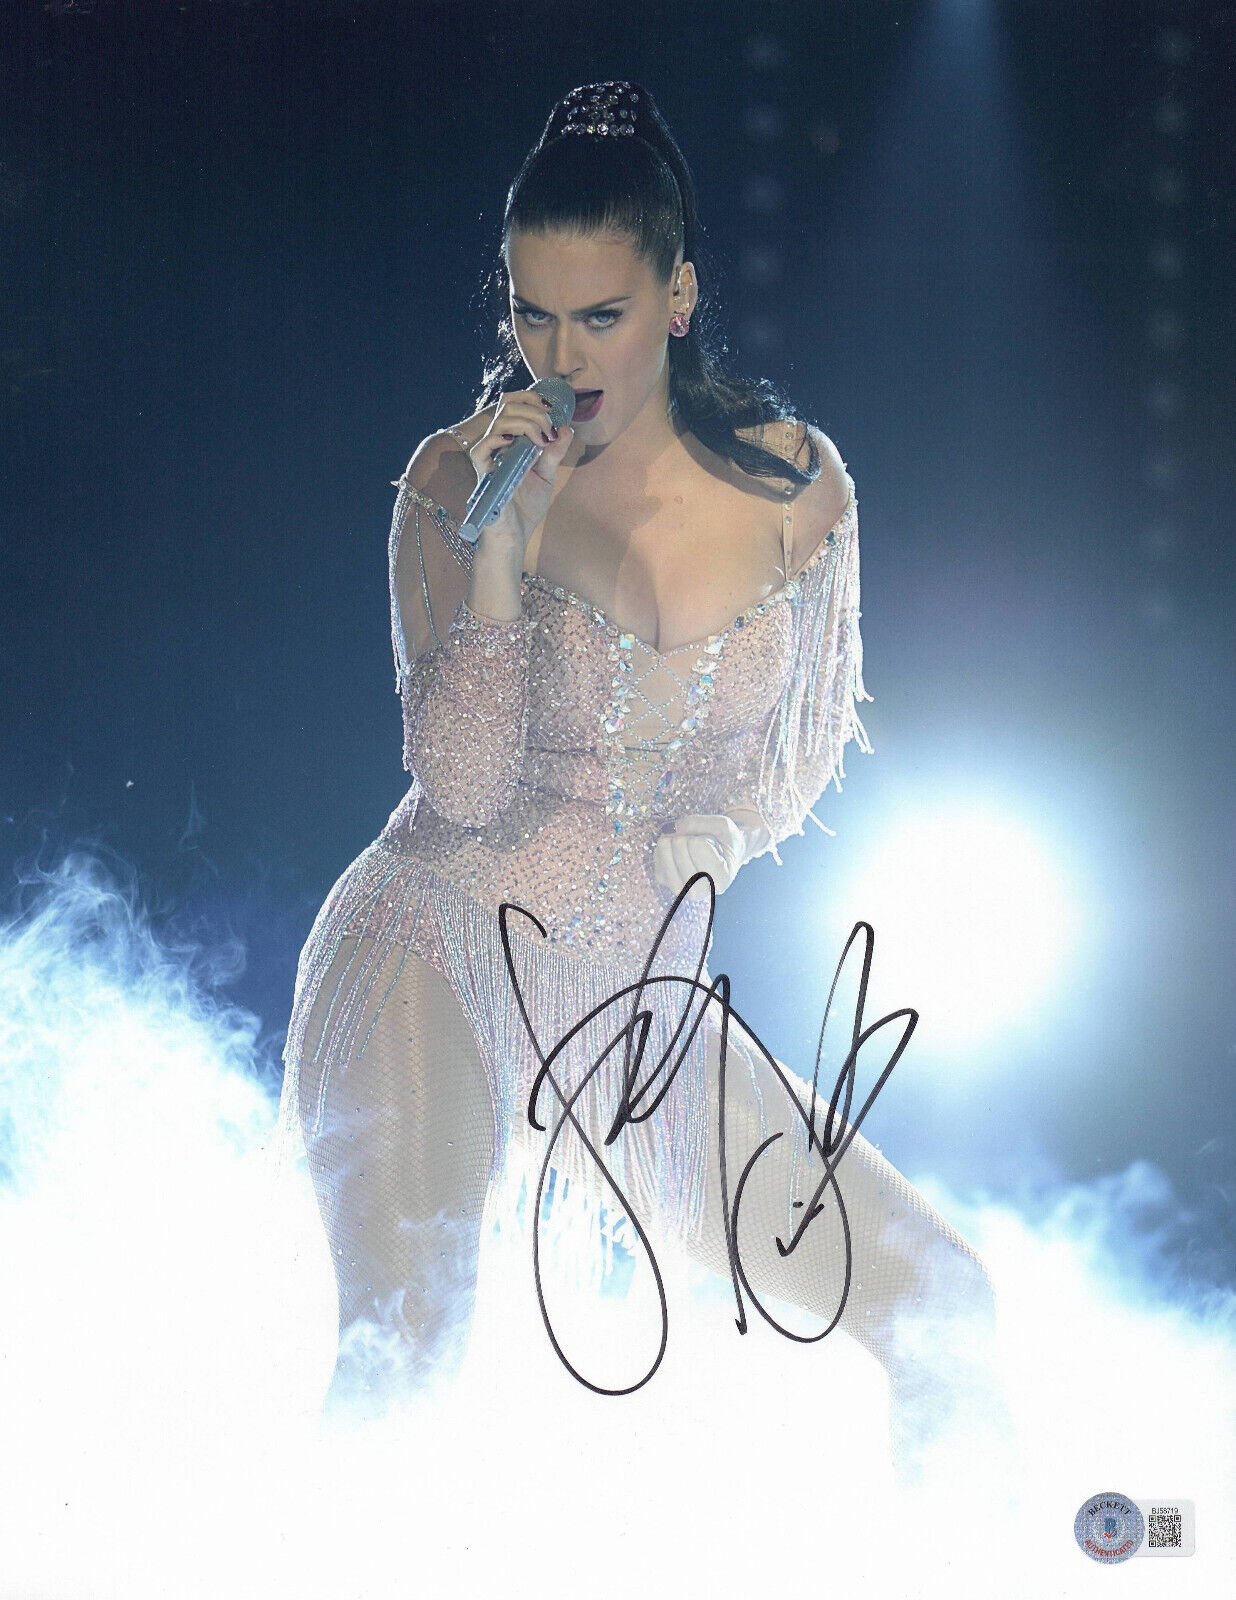 SEXY KATY PERRY SIGNED 11X14 PHOTO AUTHENTIC AUTOGRAPH BECKETT BAS 